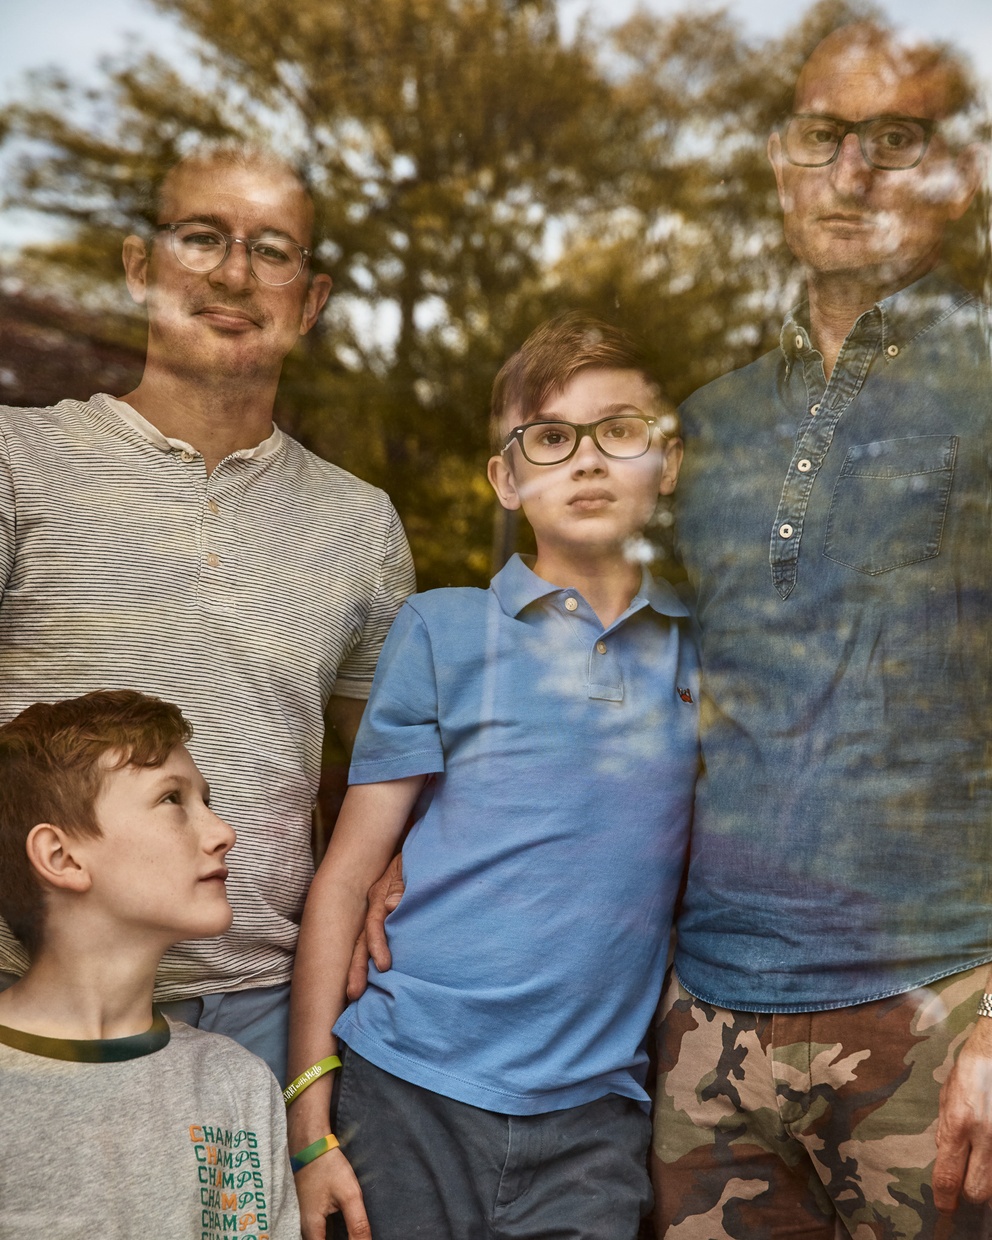 A photograph of a light-skinned family, two adult males wearing glasses and two boys, looking out a window with the reflection of a tree on it.